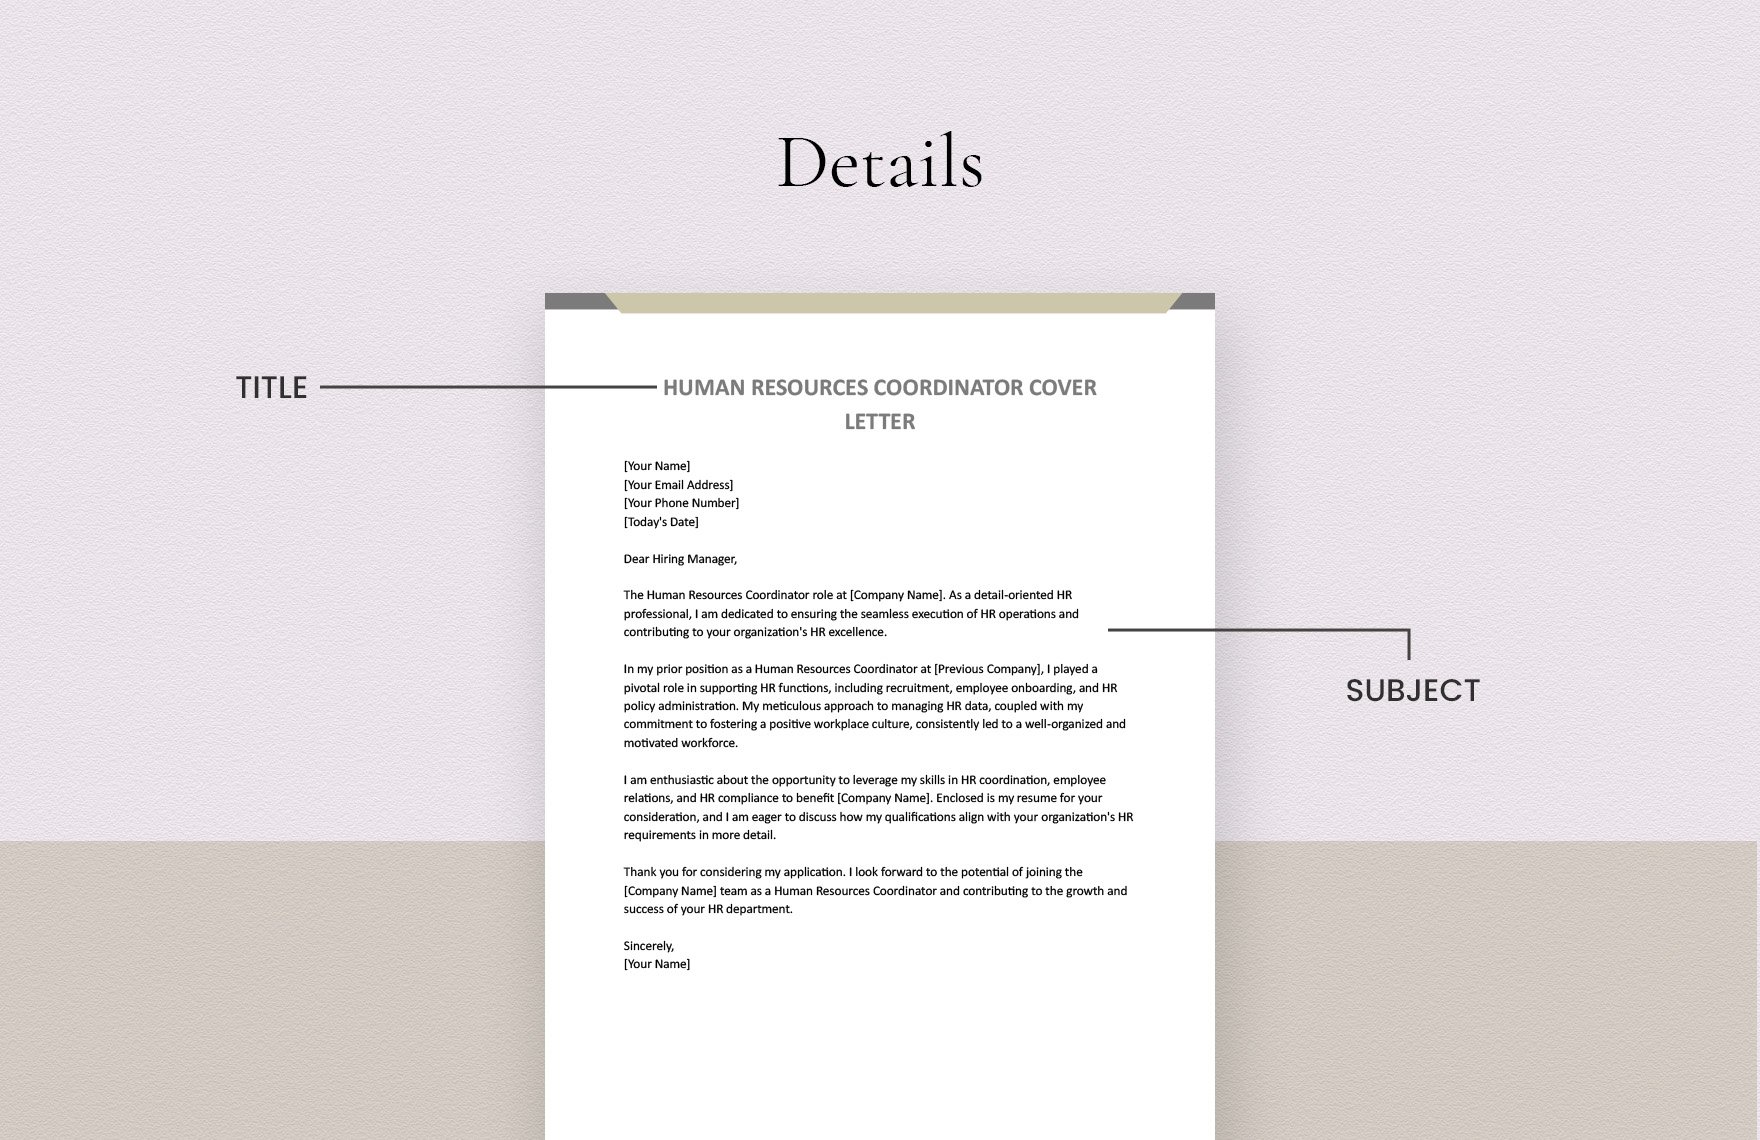 Human Resources Coordinator Cover Letter